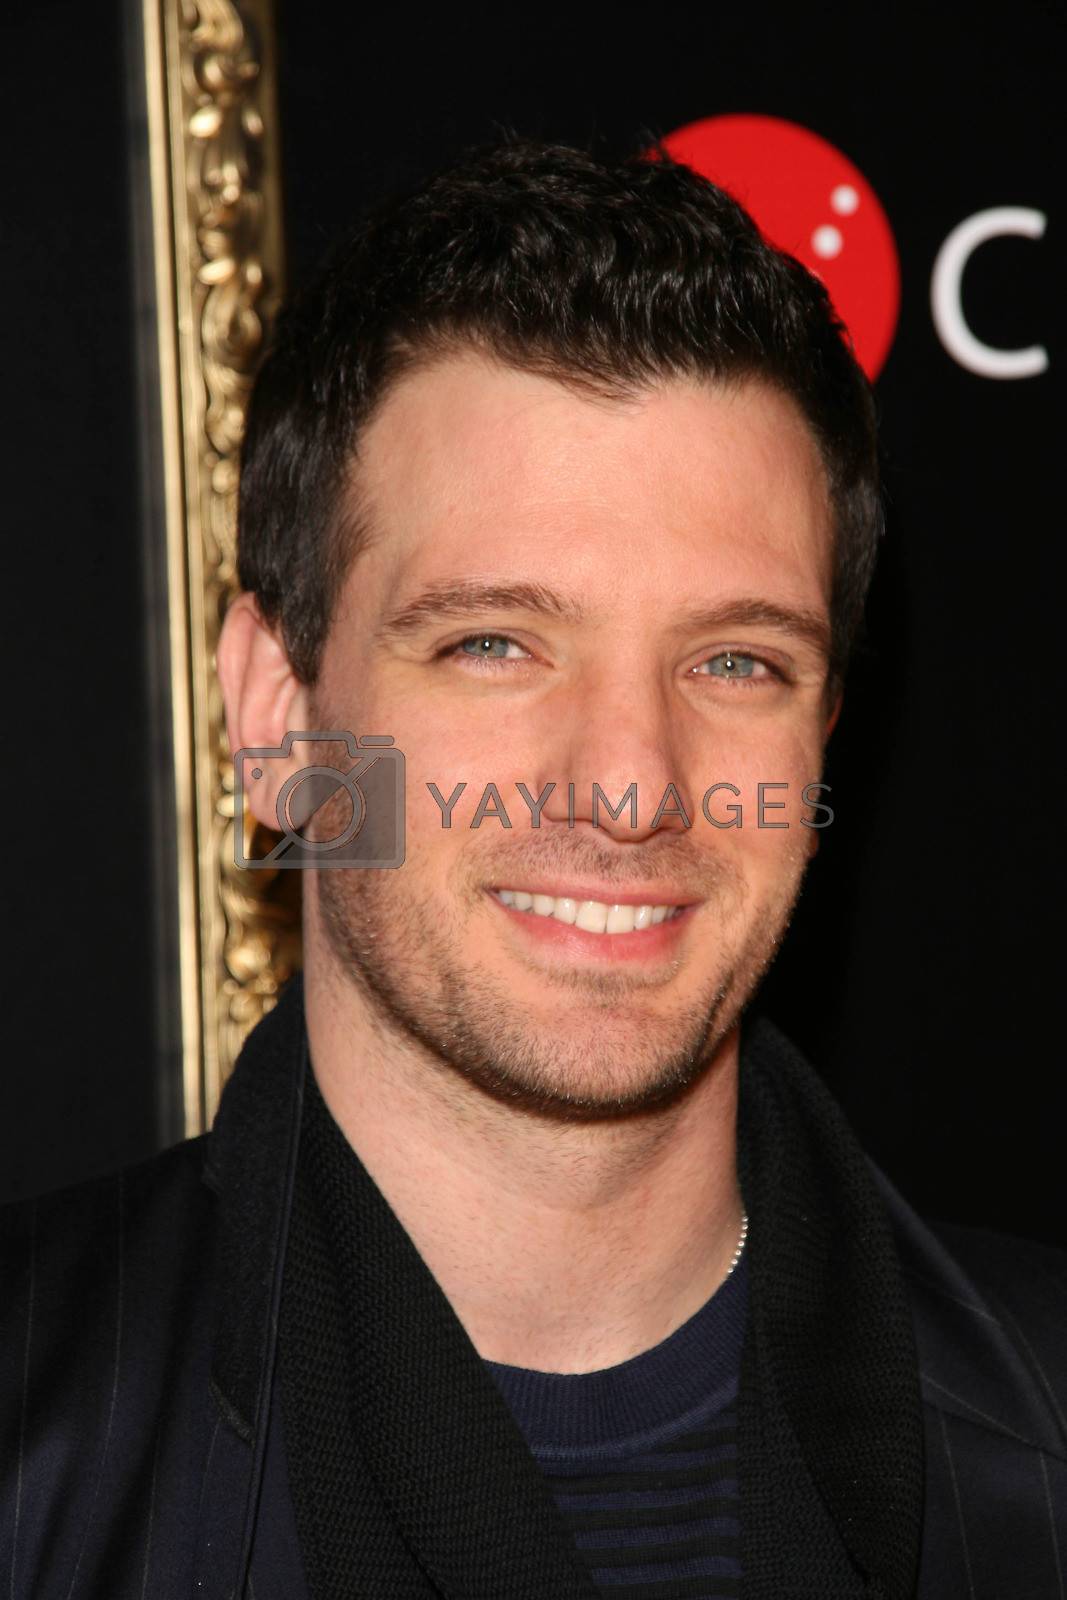 Royalty free image of J.C. Chasez
/ImageCollect by ImageCollect